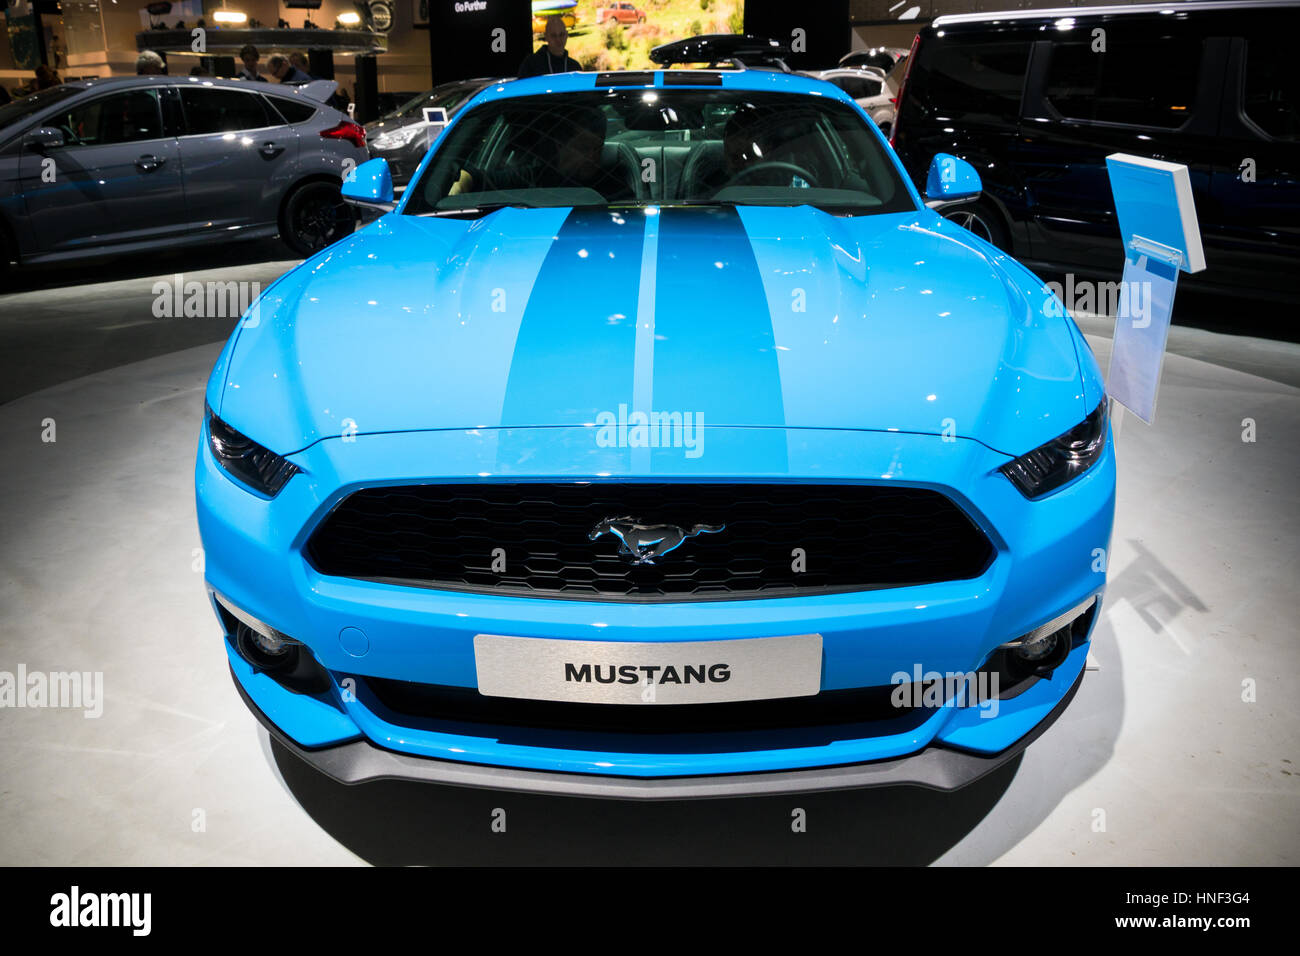 BRUSSELS - JAN 19, 2017: Blue Ford Mustang car on display at the Motor Show Brussels Stock Photo